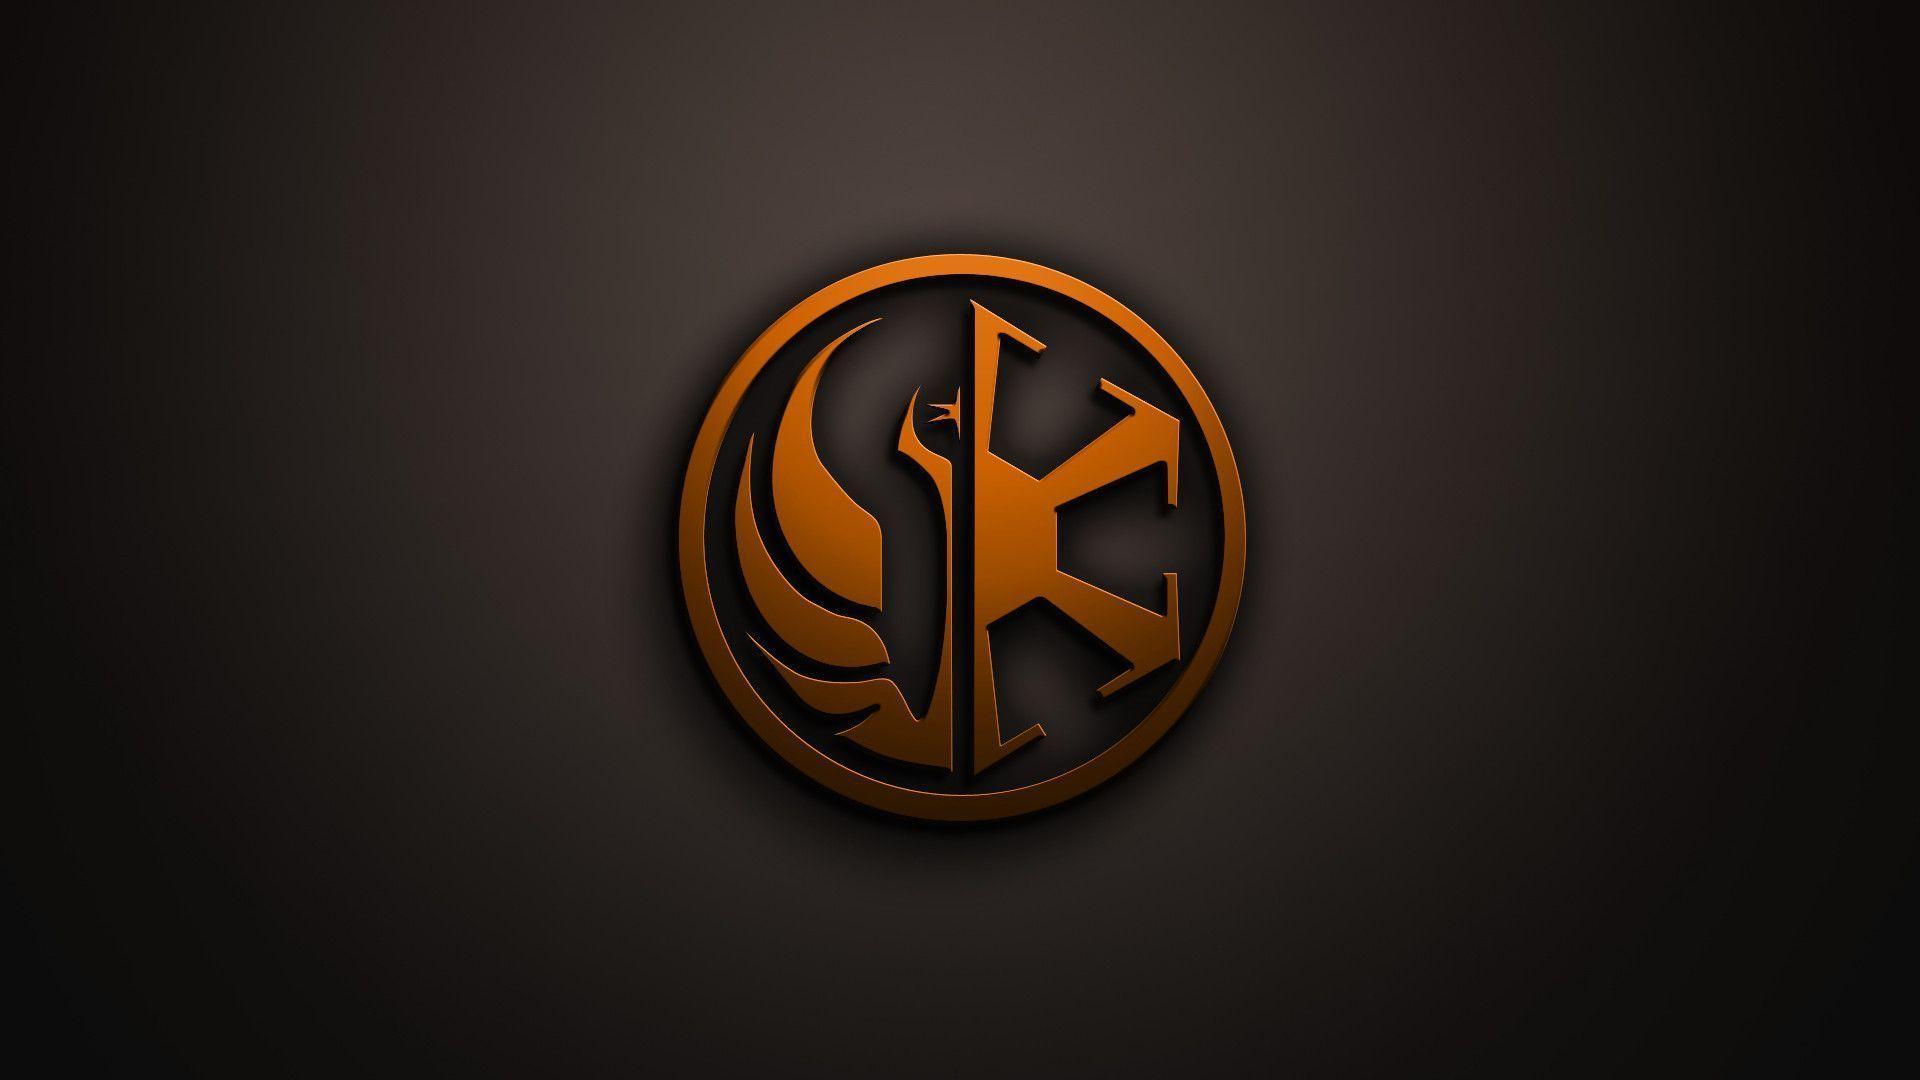 Star Wars: The Old Republic Wallpaper. Star Wars: The Old